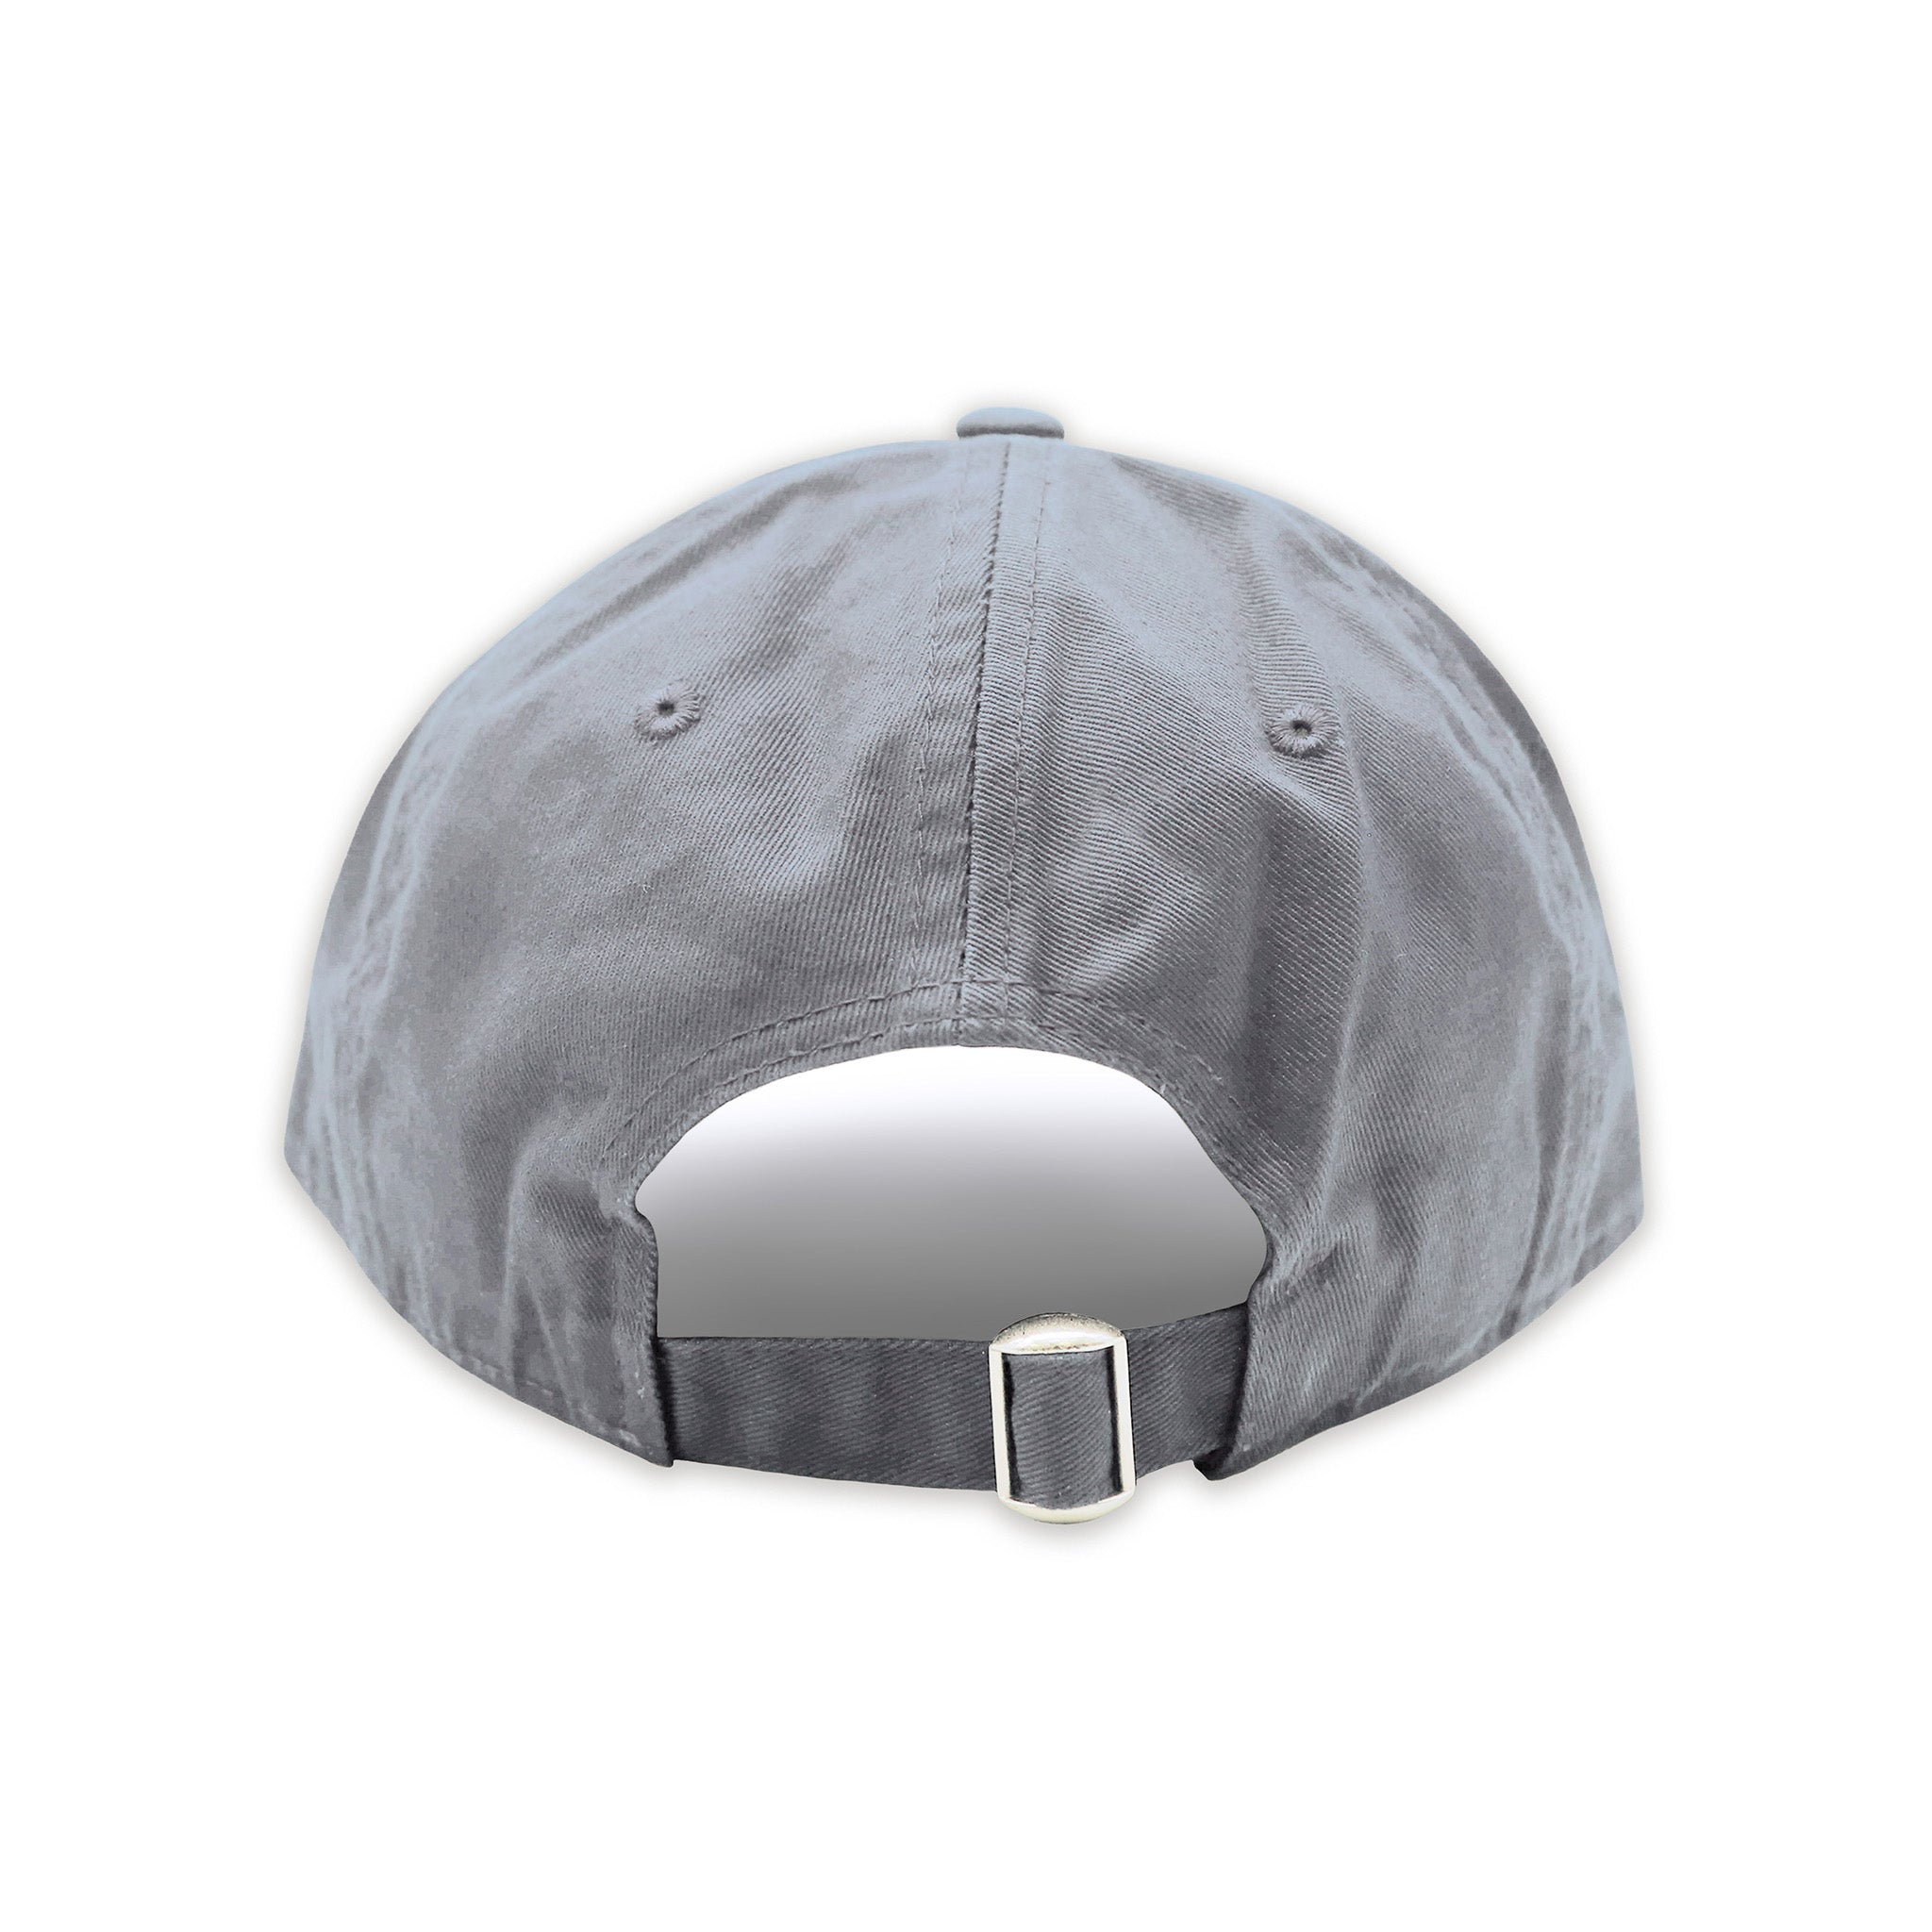 Tennessee Power T Hat (Grey)